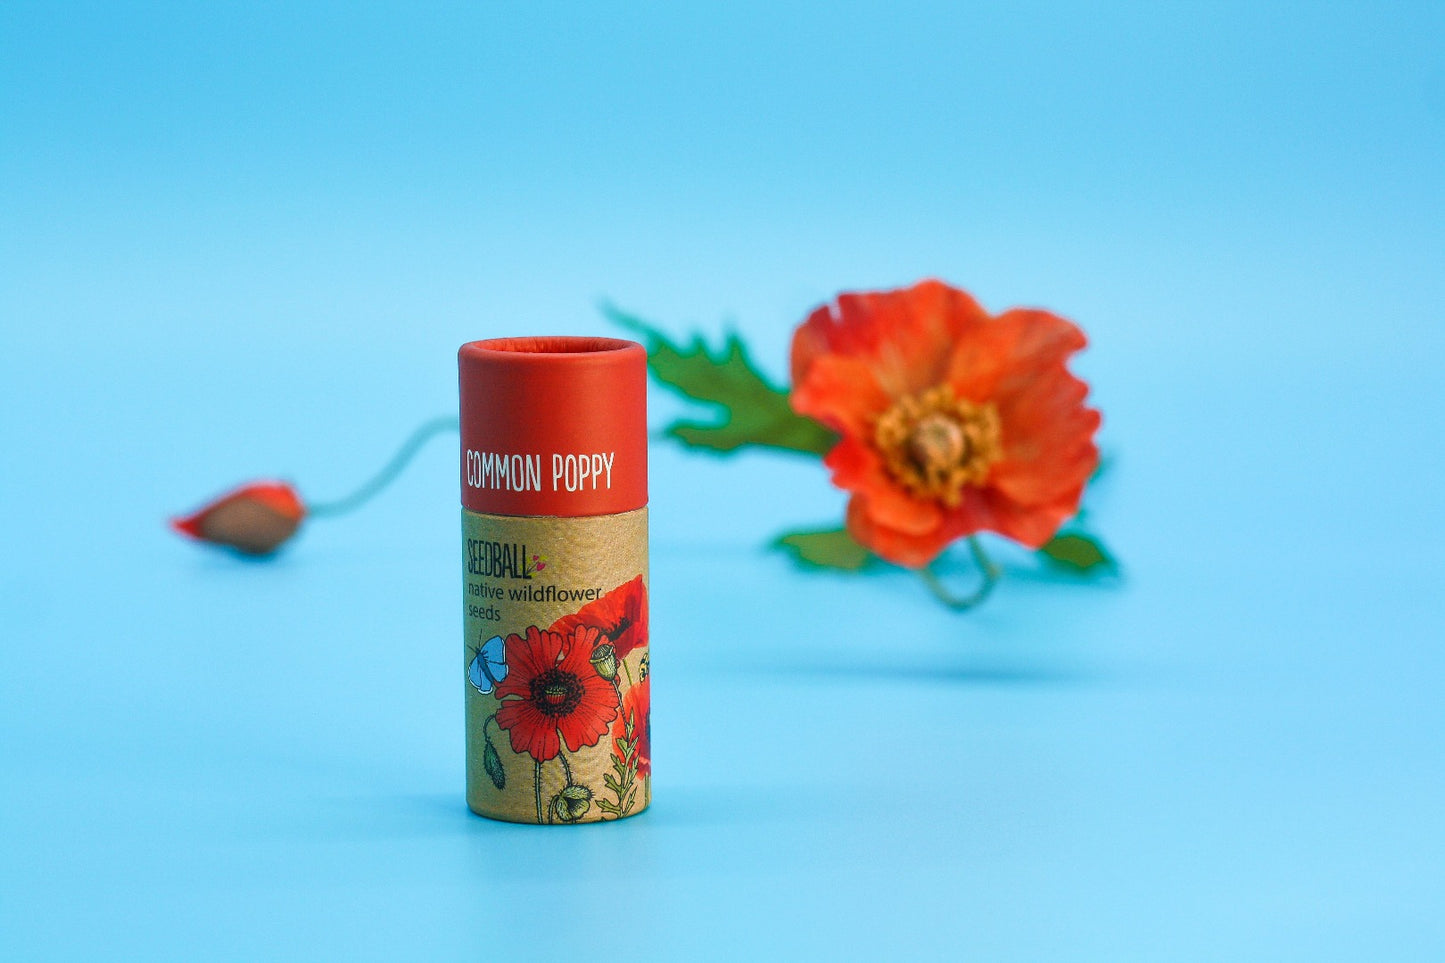 Tube of common poppy seedballs with a common poppy in the background